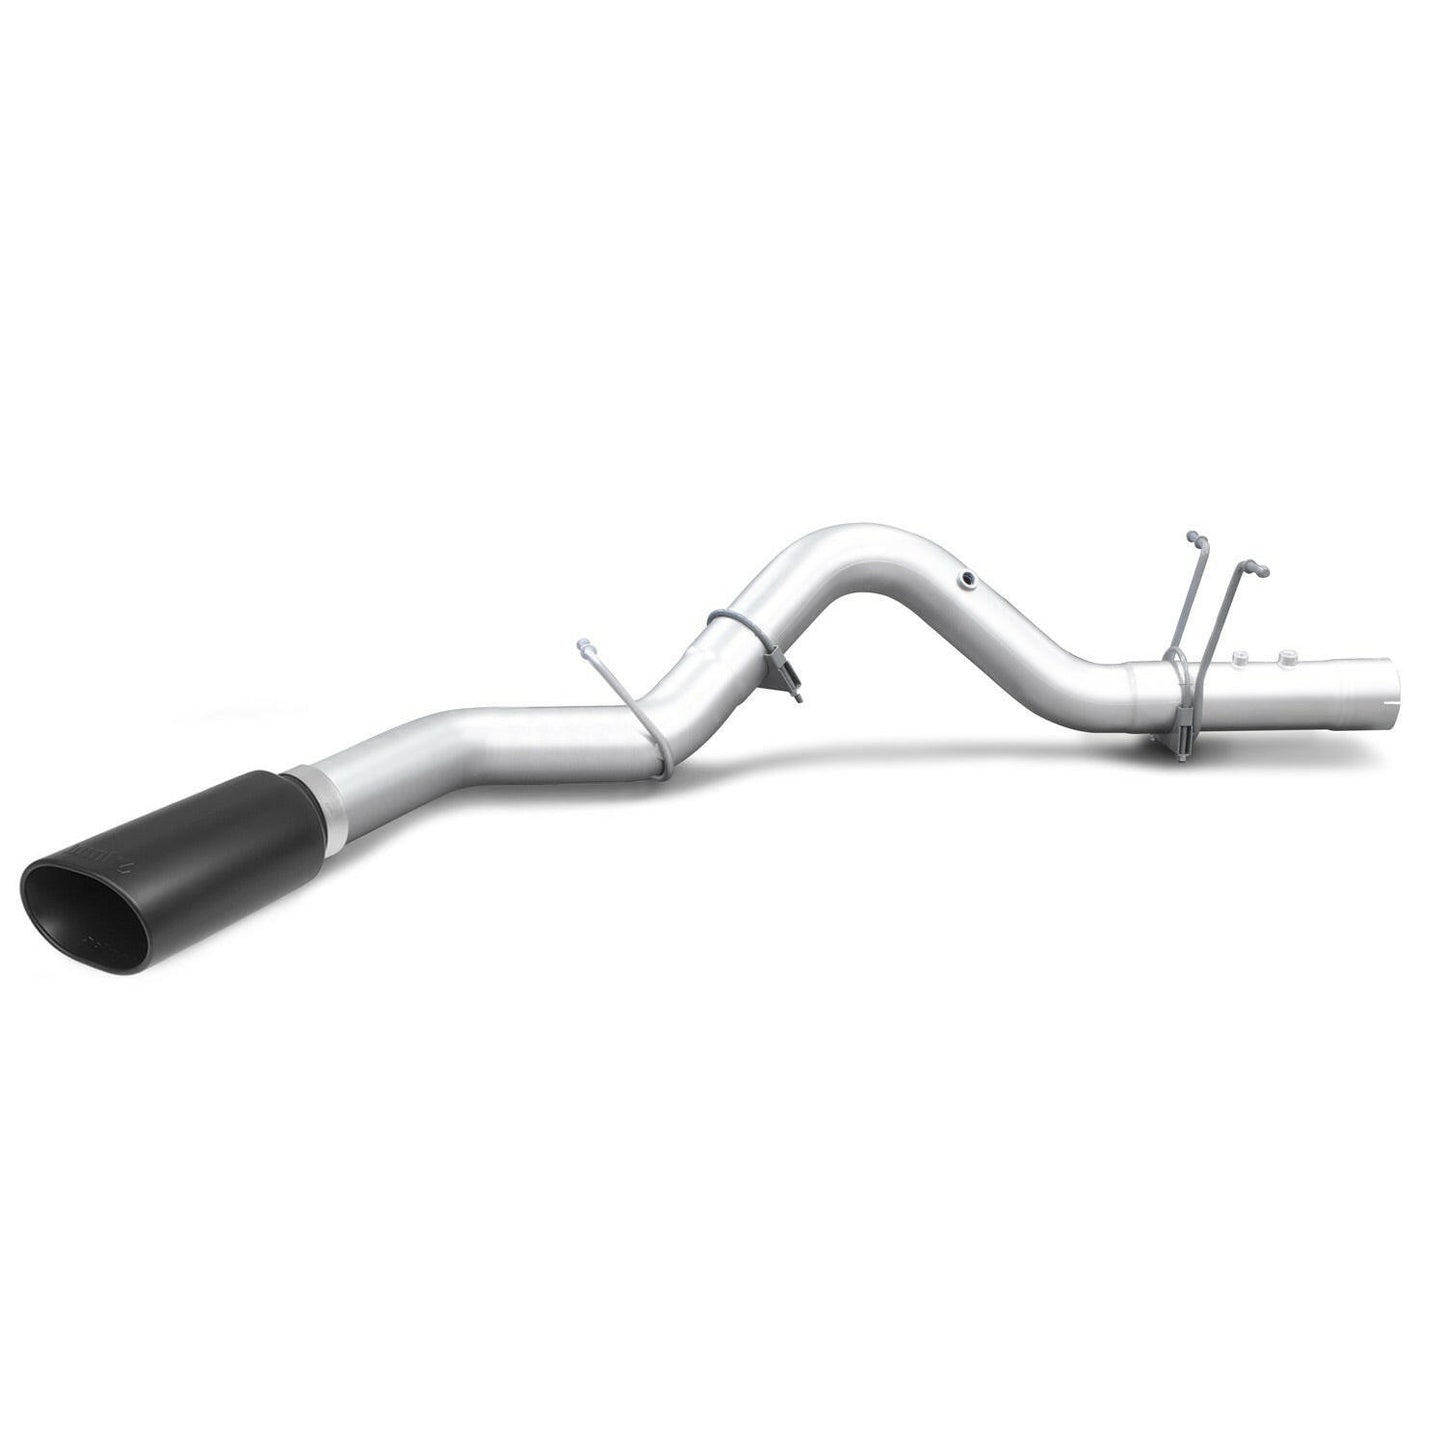 Banks Power Monster Exhaust System 4-inch Single Exit Black Tip 17-18 Chevy 6.6L L5P from Banks Power.